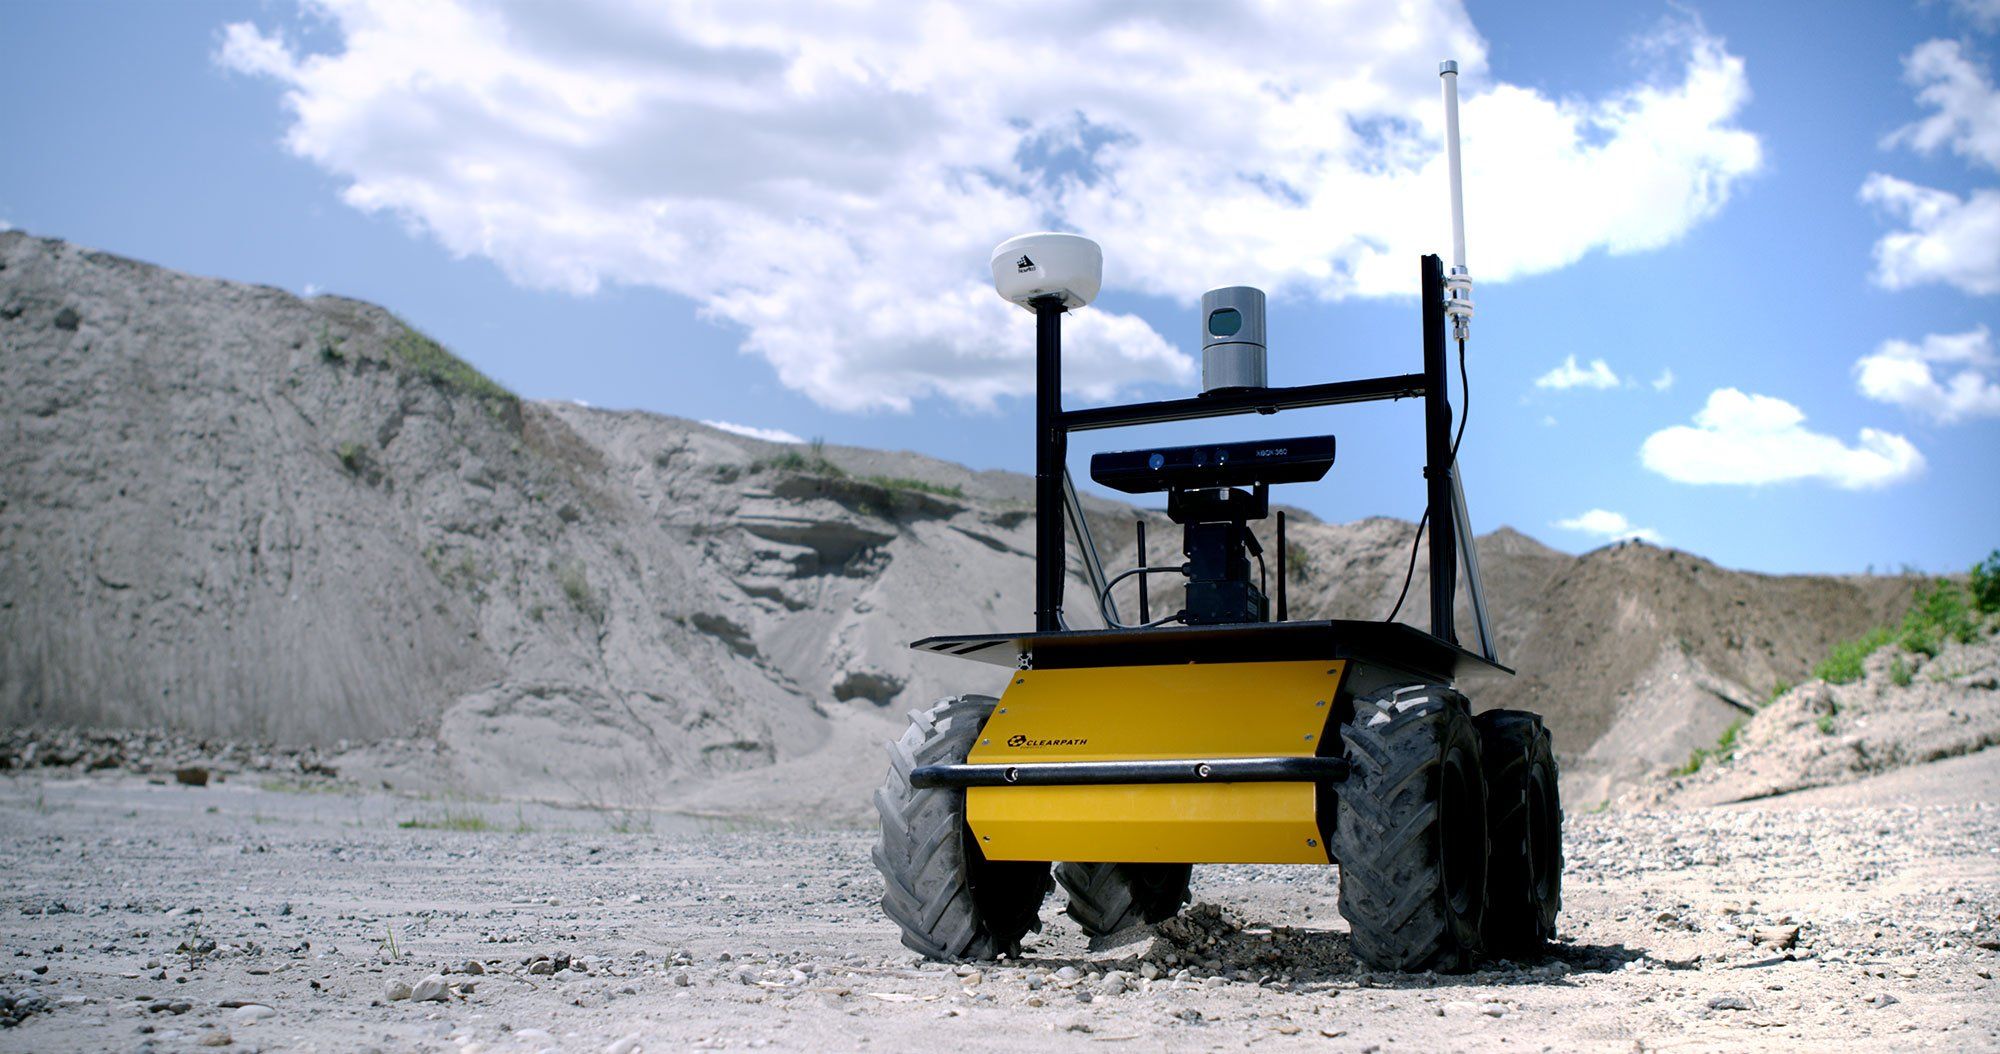 A photo of a small yellow body robot vehicle with black wheels and sensors on top patrolling a quarry.